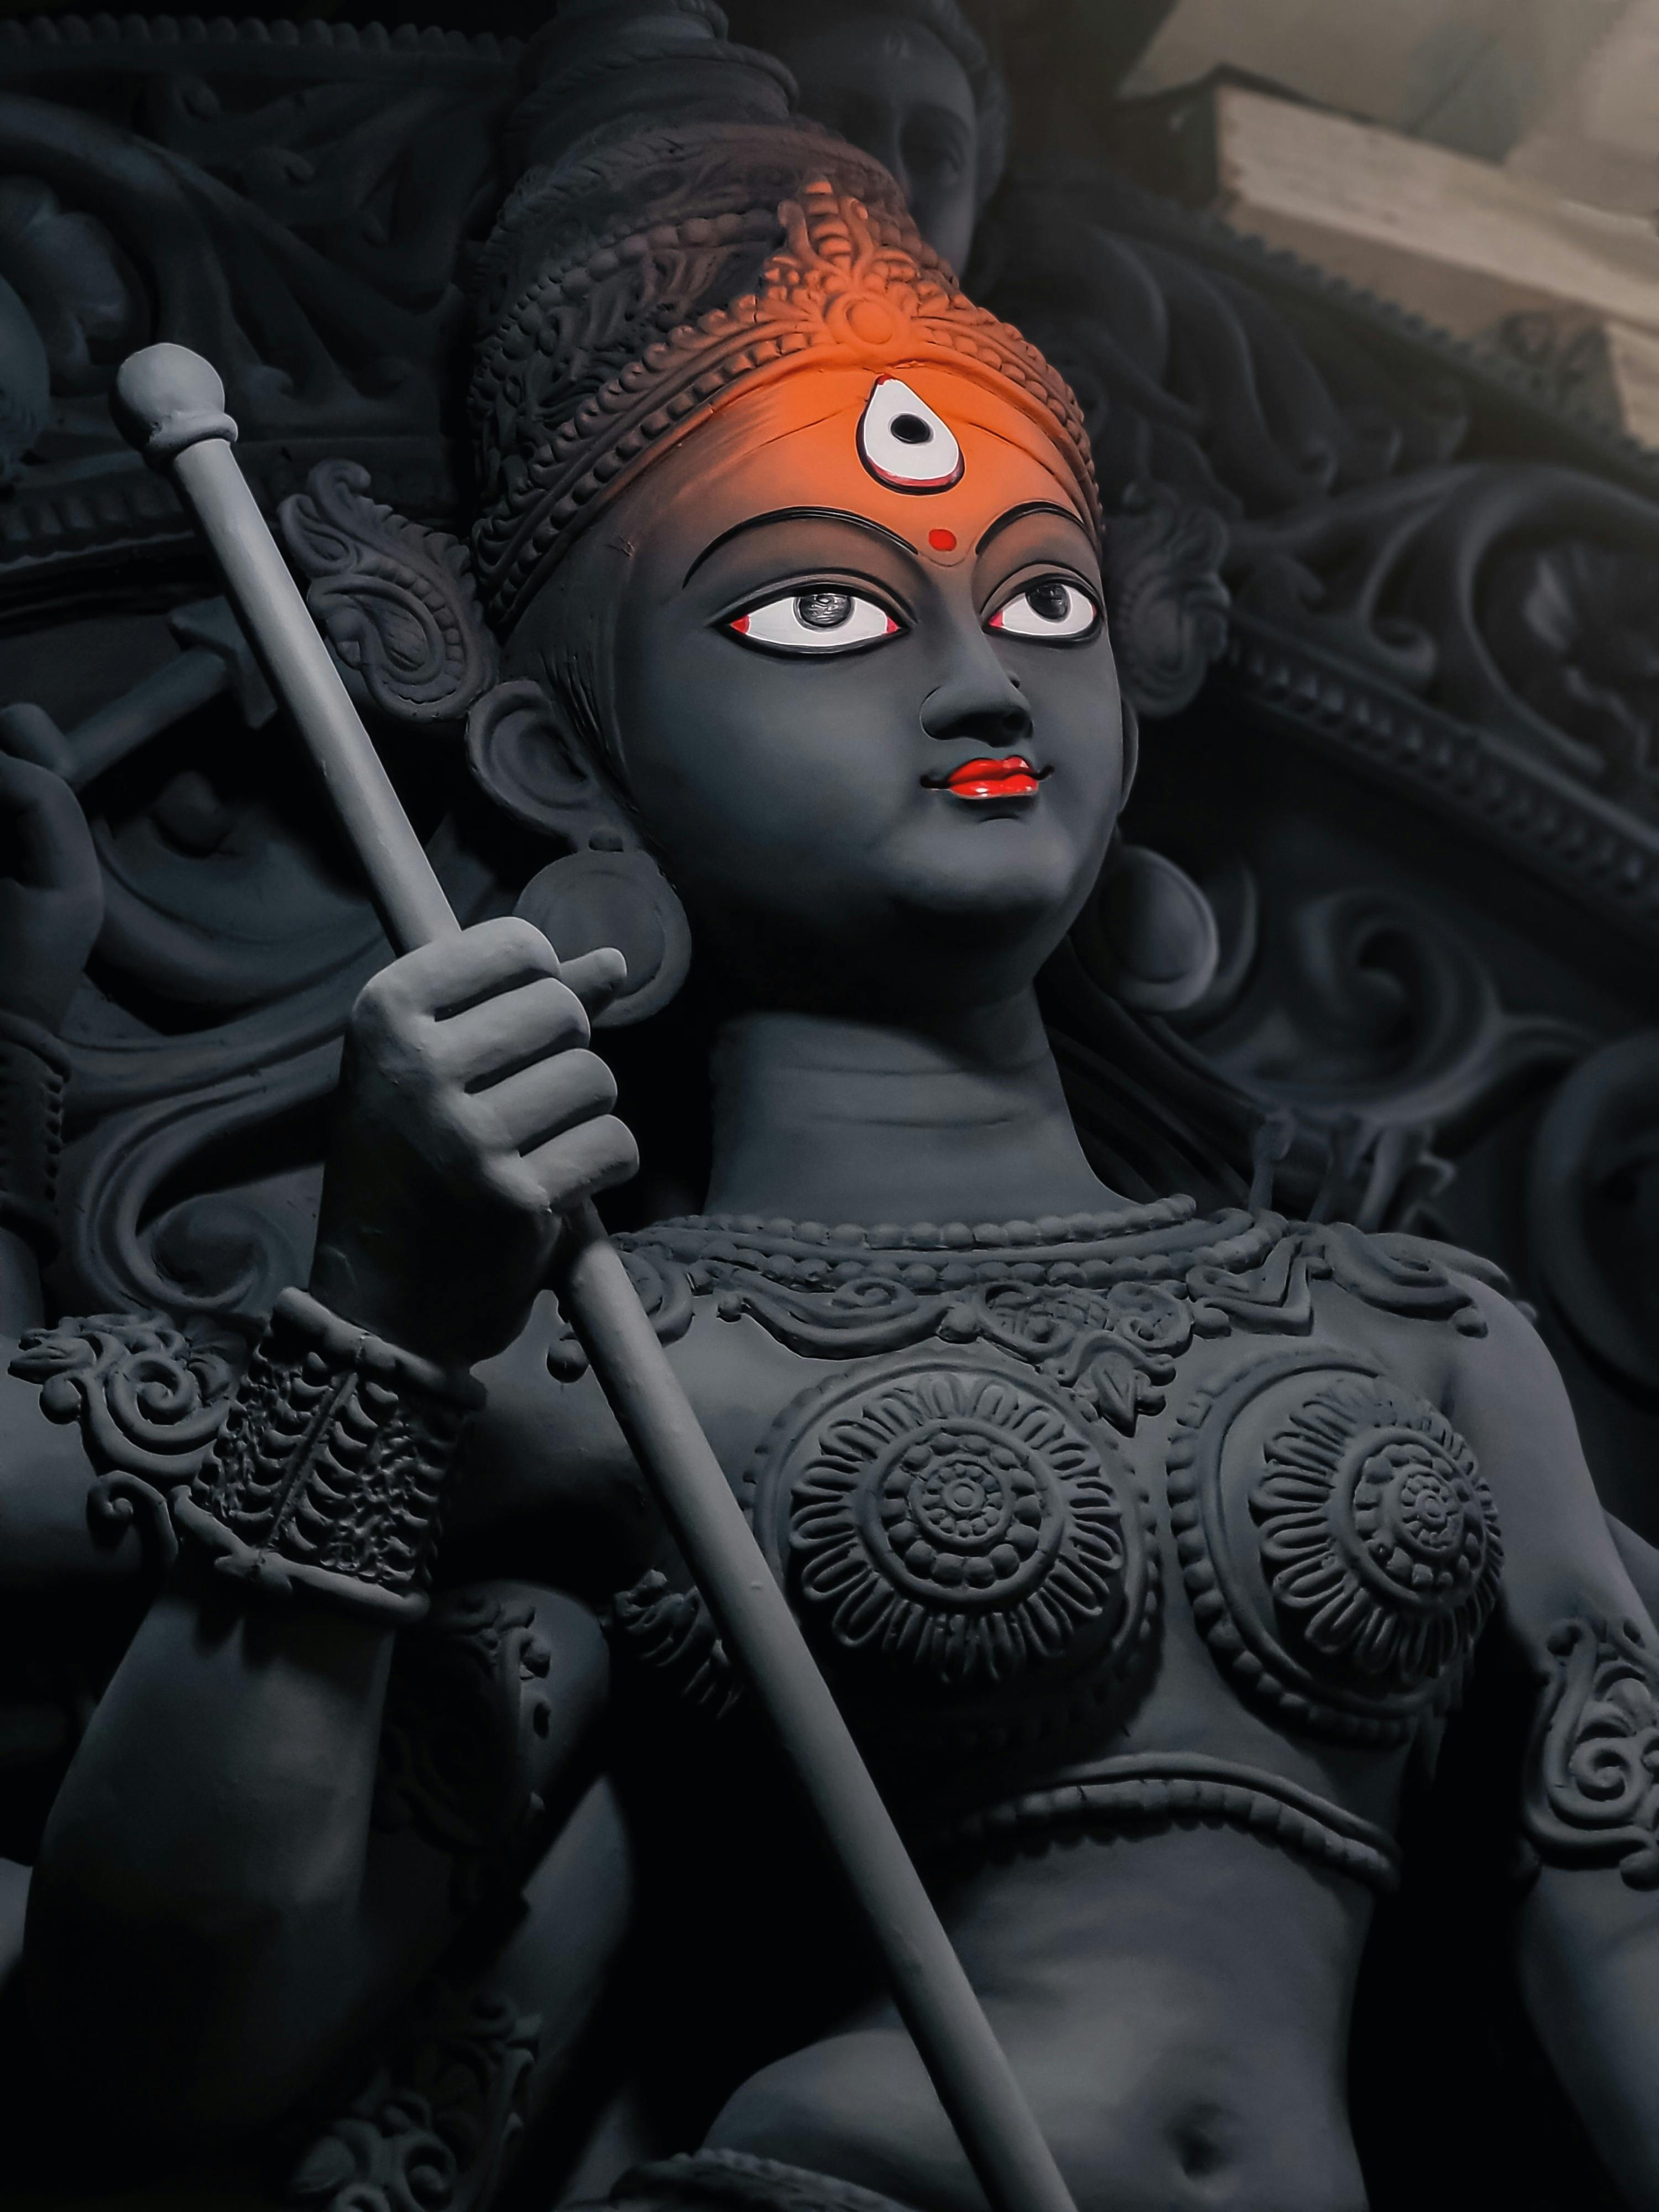 Who Is The Hindu Goddess Of Wealth, Wisdom, Fortune, And Prosperity?